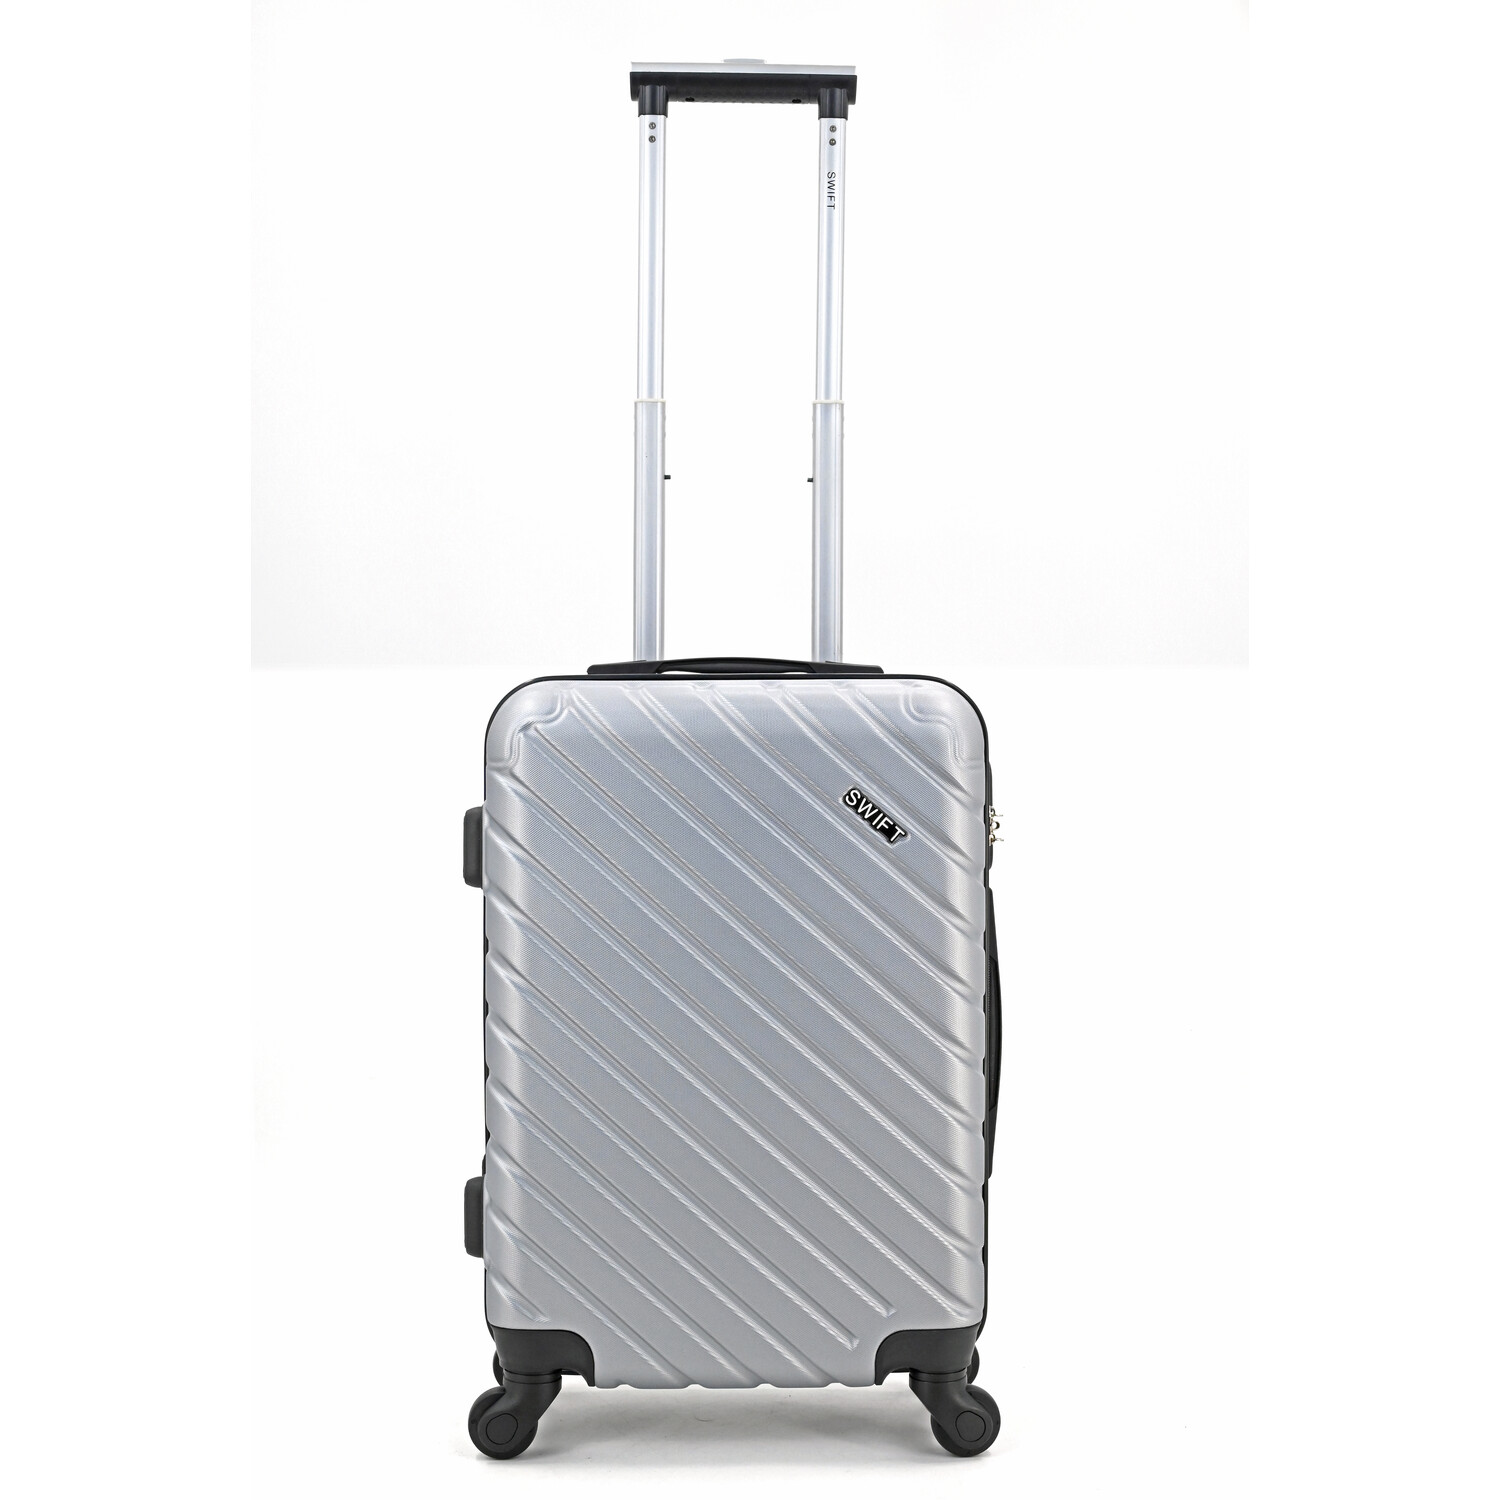 Swift Astral Suitcase - Silver / Cabin Case Image 1